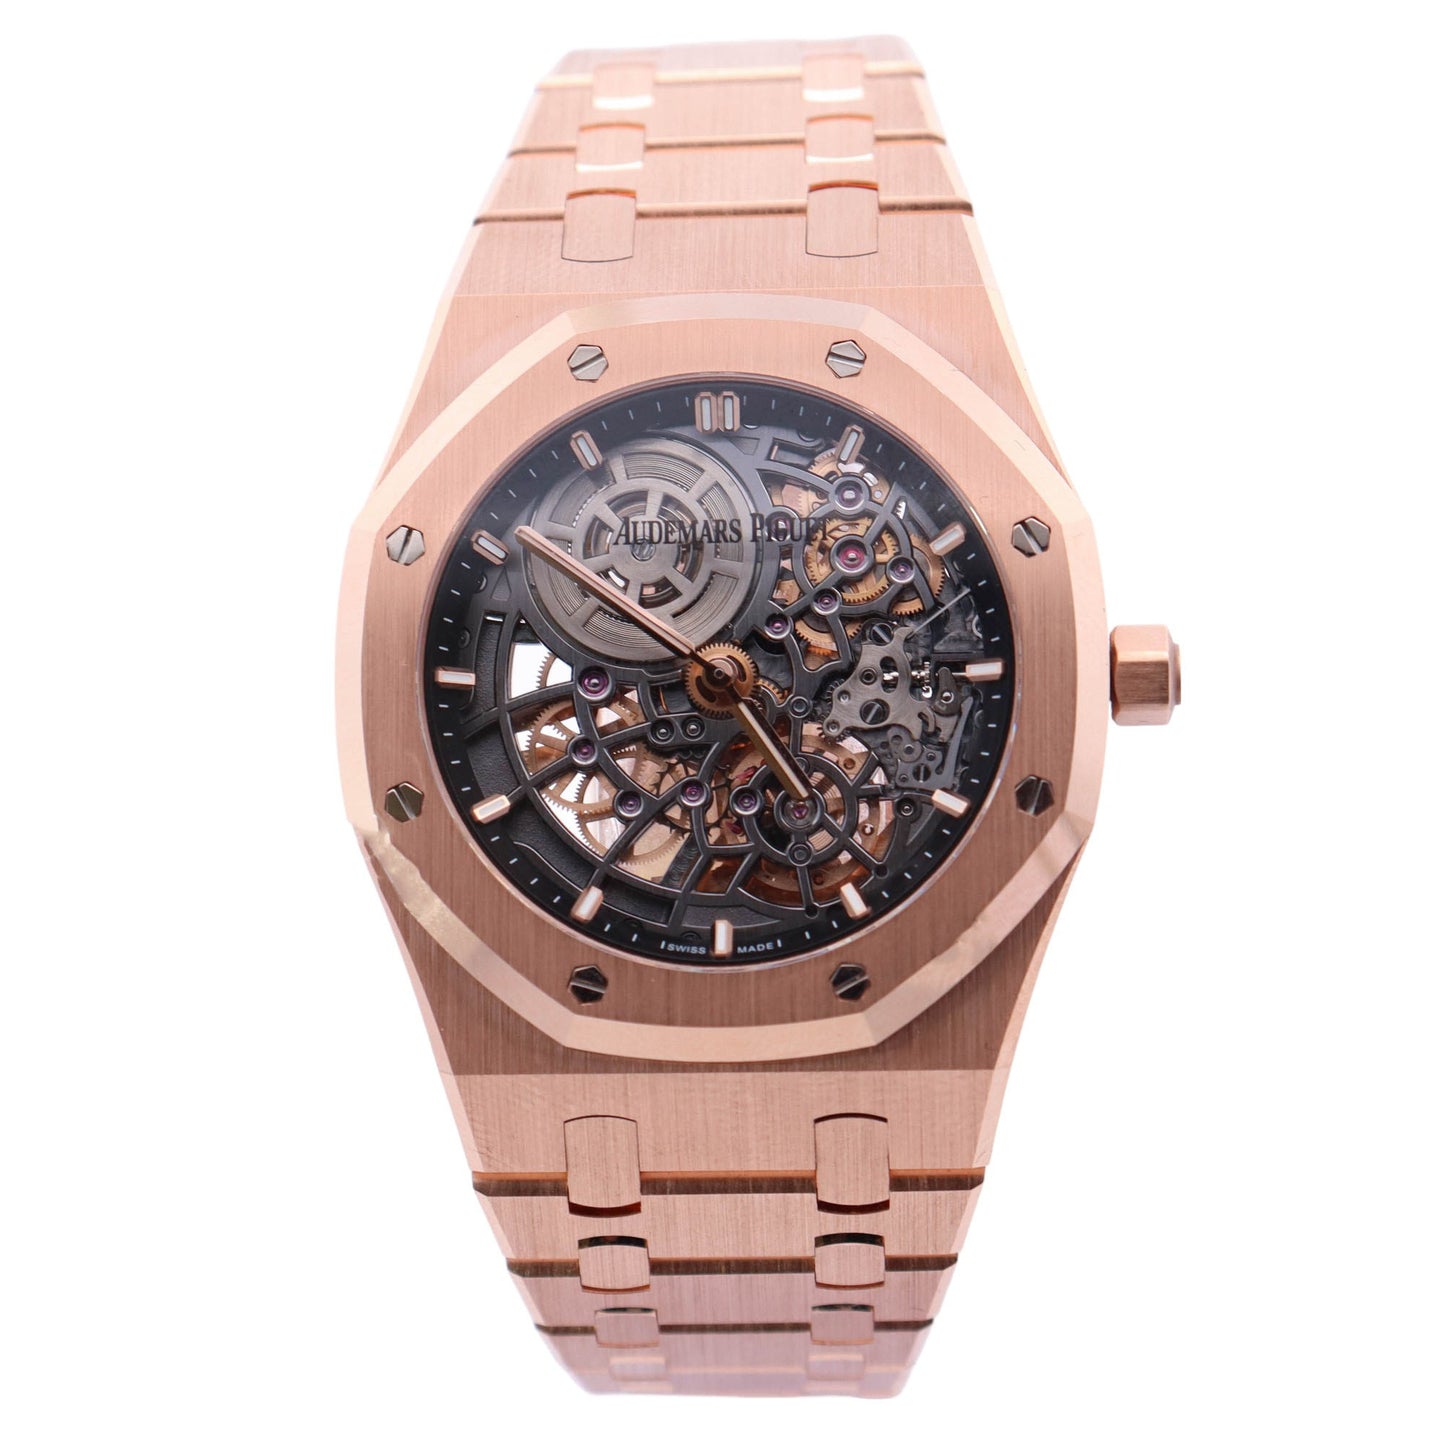 Audemars Piguet Royal Oak Jumbo Extra-Thin Openworked "50th Anniversary" Rose Gold 39mm Openwork Stcik Dial Watch Ref# 16204OR.OO.1240OR.01 - Happy Jewelers Fine Jewelry Lifetime Warranty